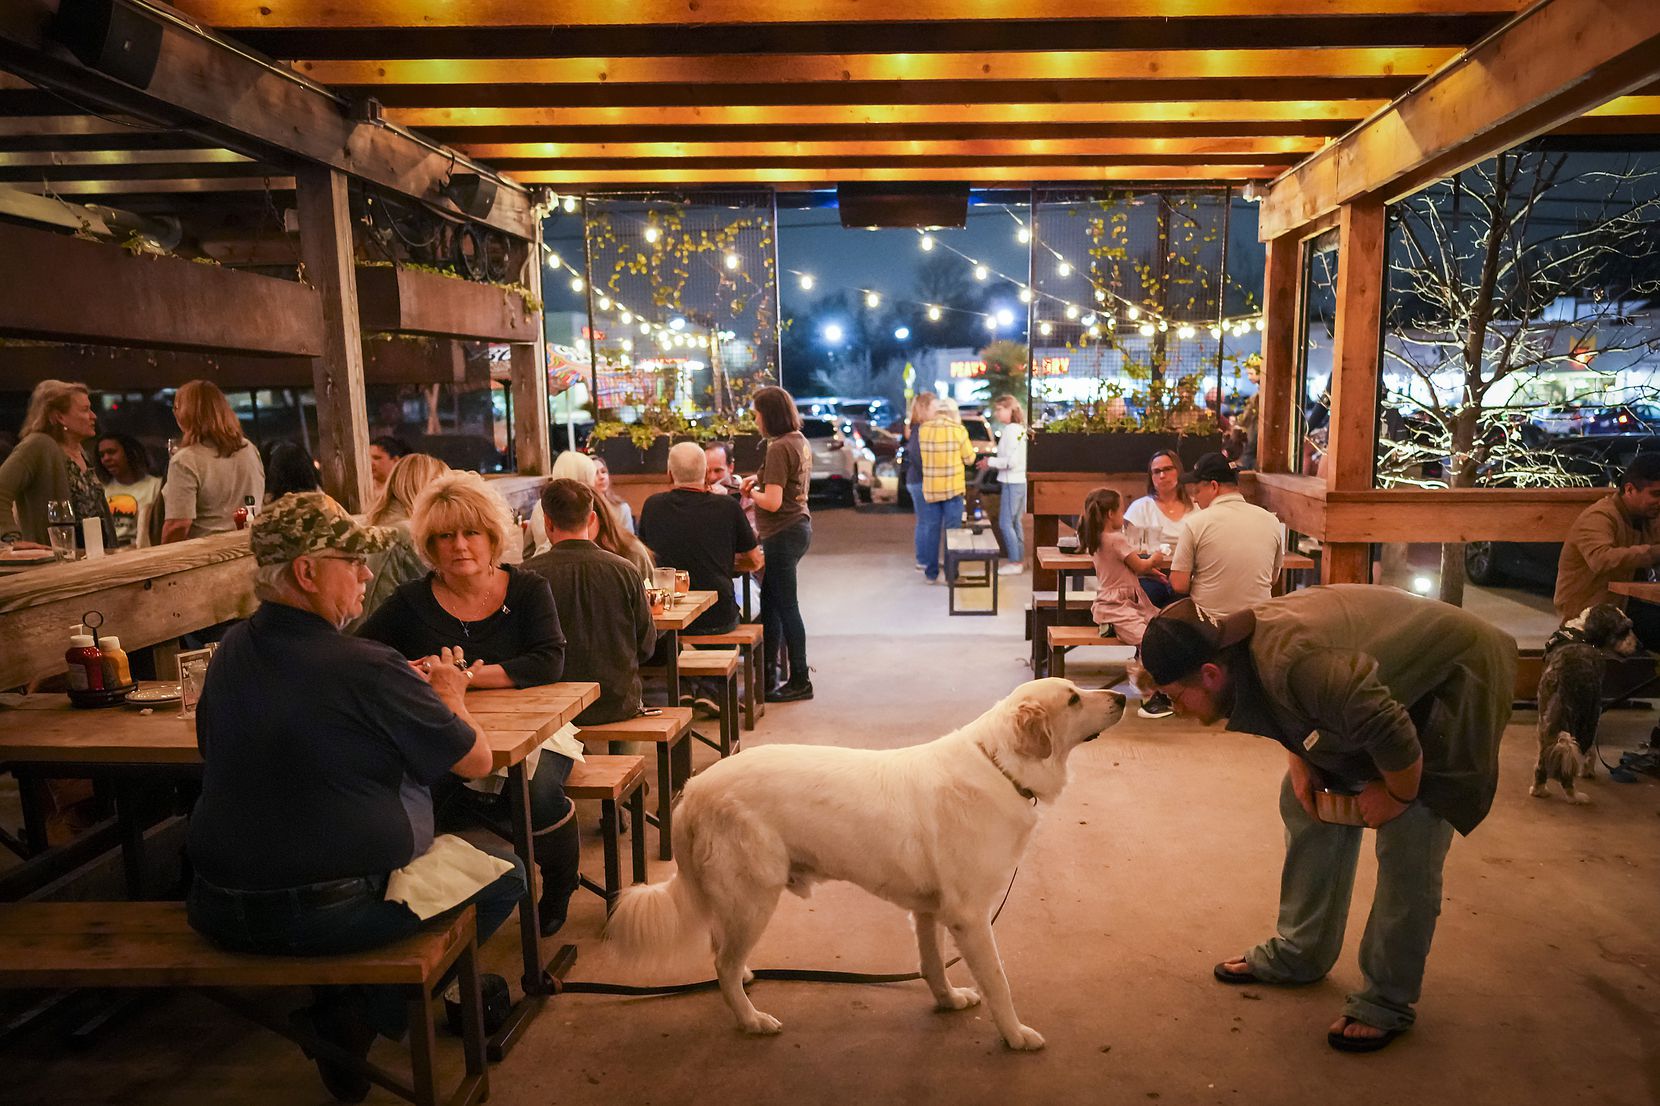 Byron and Tina Studdard relax on the dog-friendly patio at Goodfriend Beer Garden as their...